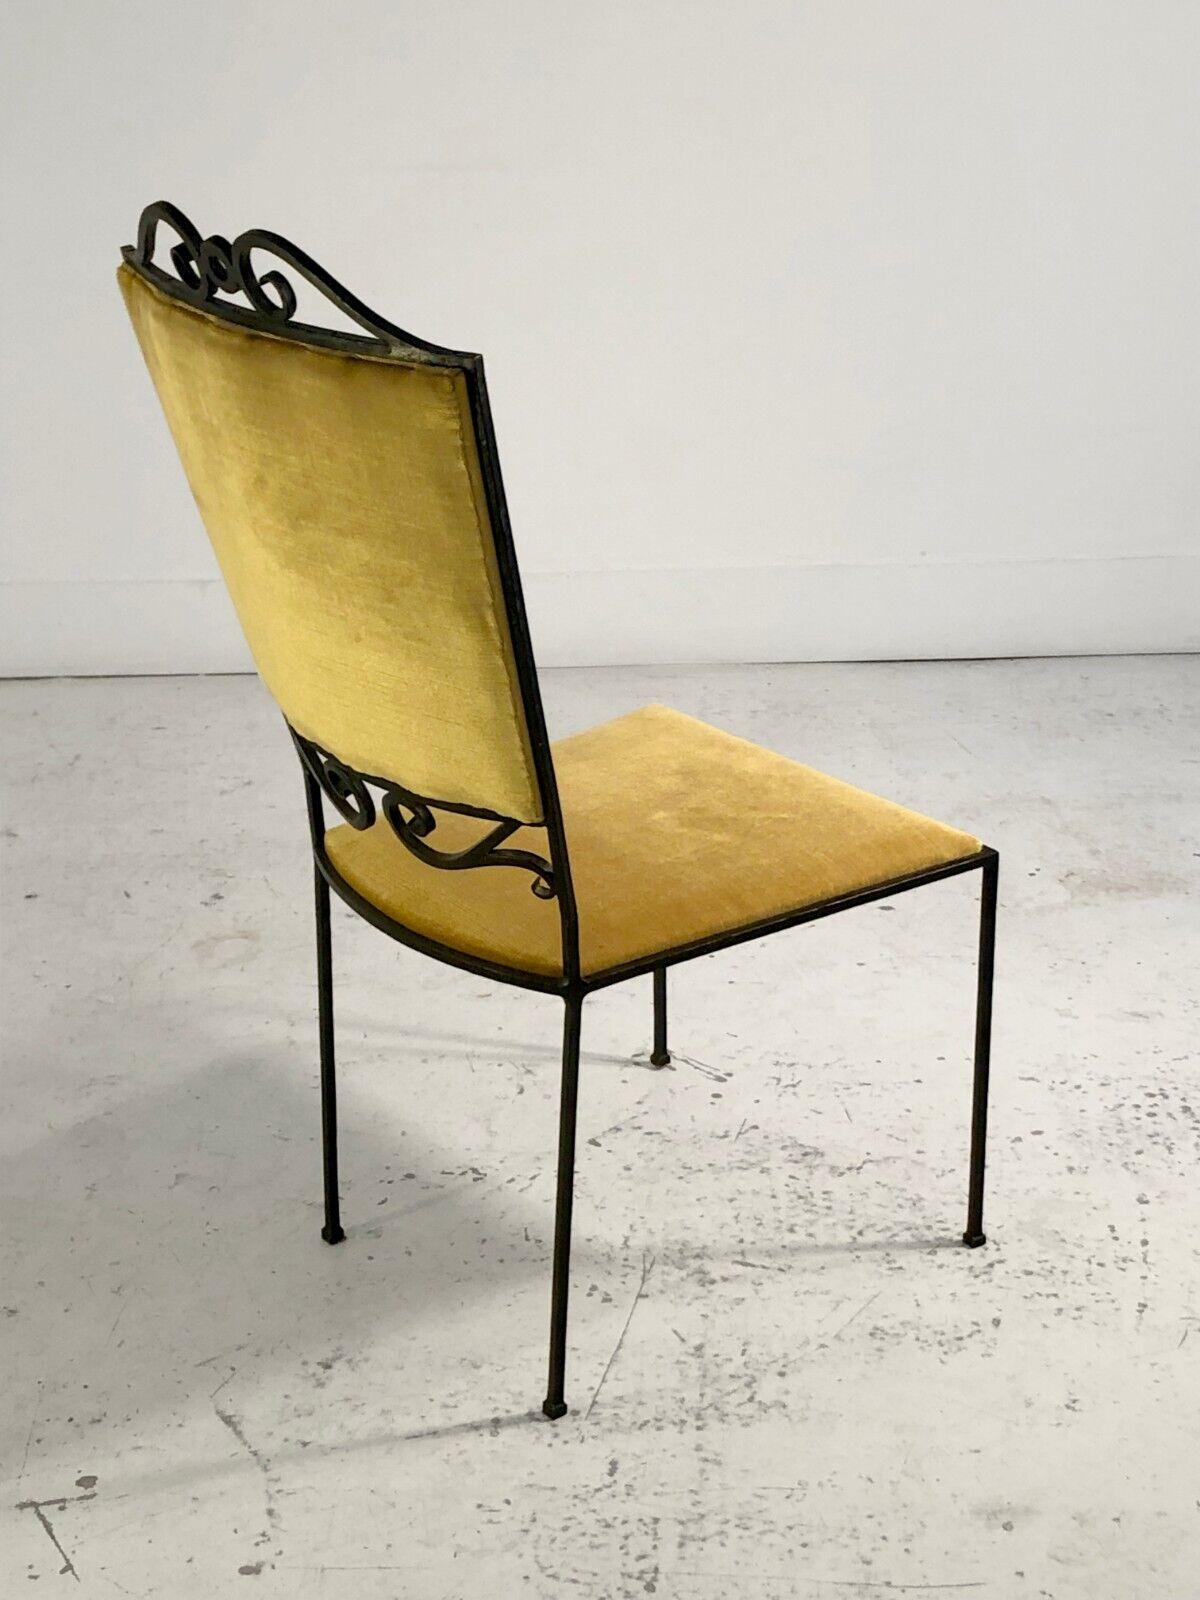 A SCULPTURAL NEOCLASSICAL SHABBY-CHIC WROUGHT IRON ARTIST CHAIR, France 1980 For Sale 3